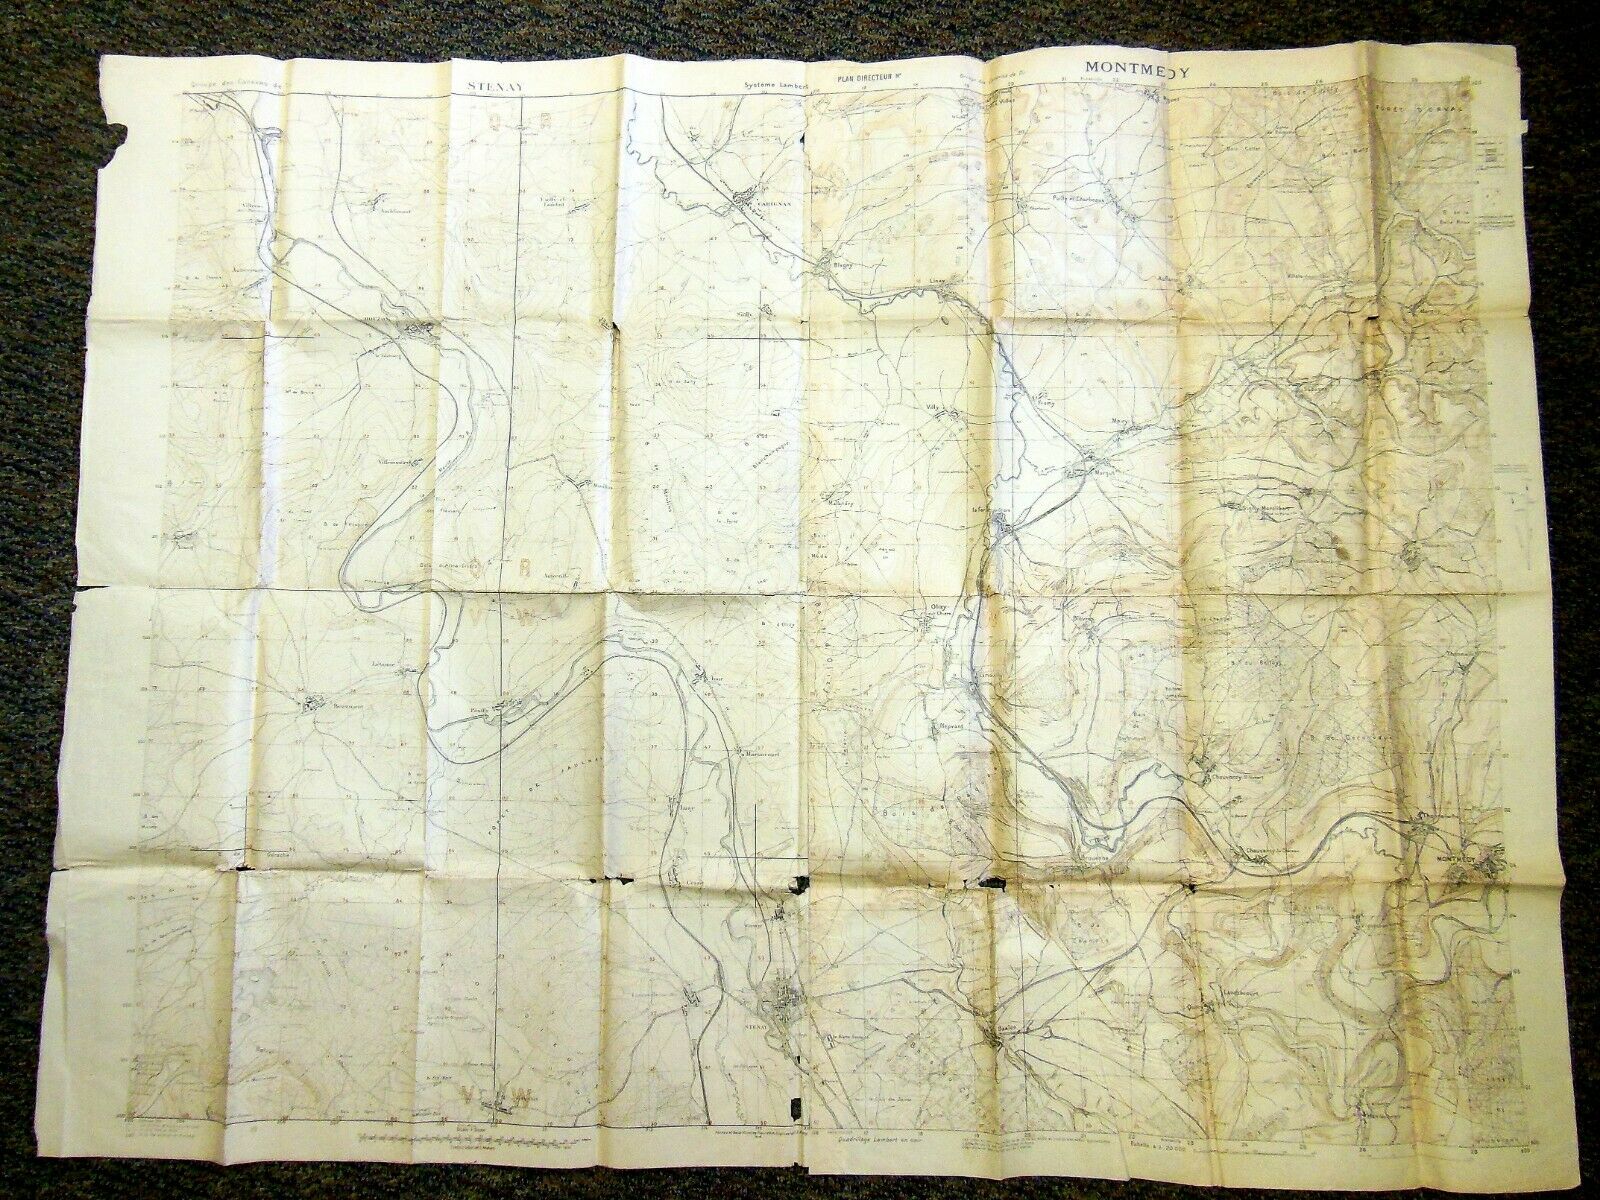 Ww1 Huge Very Rare Original U.s.a Army Used Map Of Germany For Troop Planning.